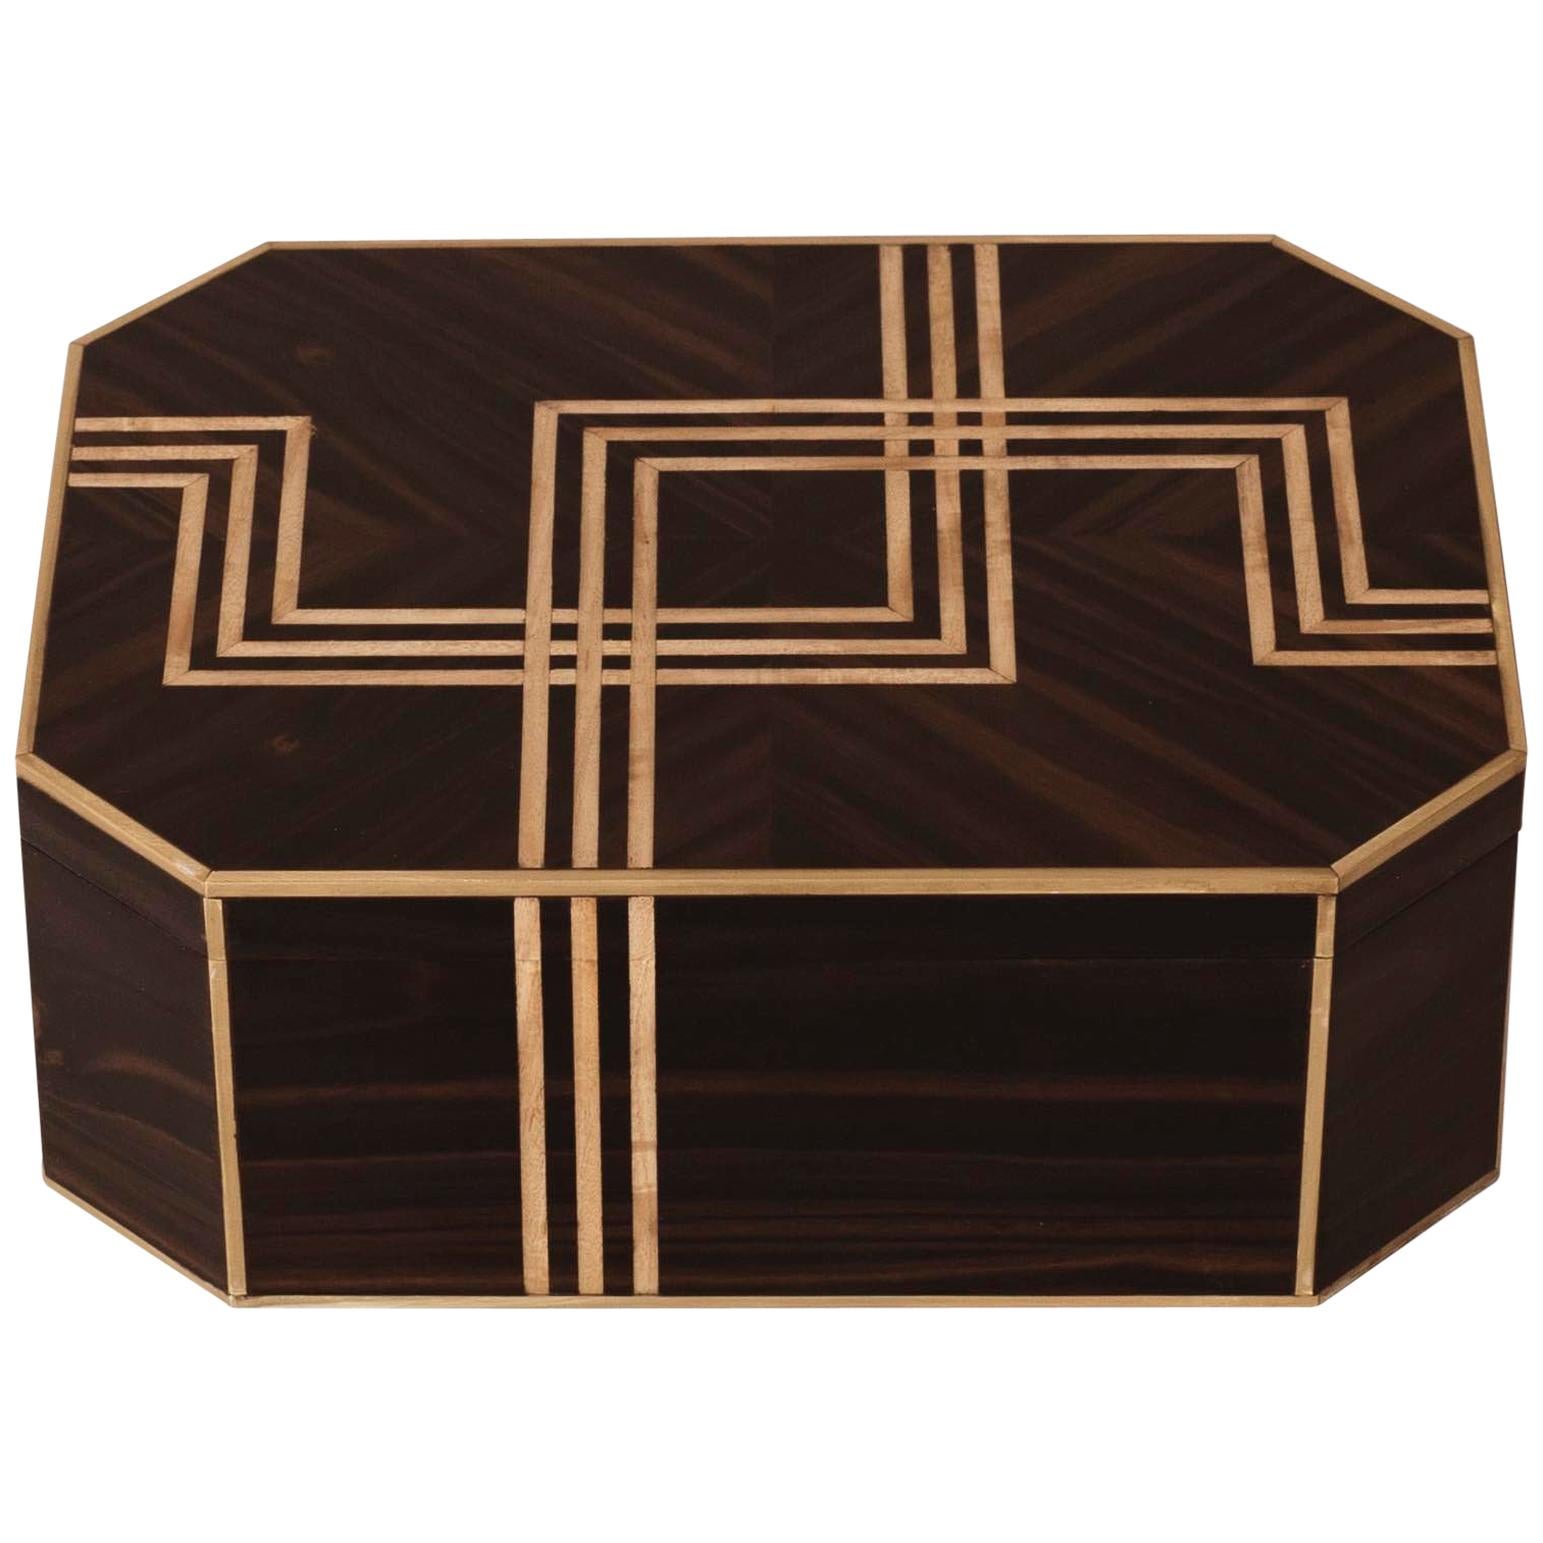 Art Deco Style Box with Ebony Veneer, with Inlays in Bronze and Springwood For Sale